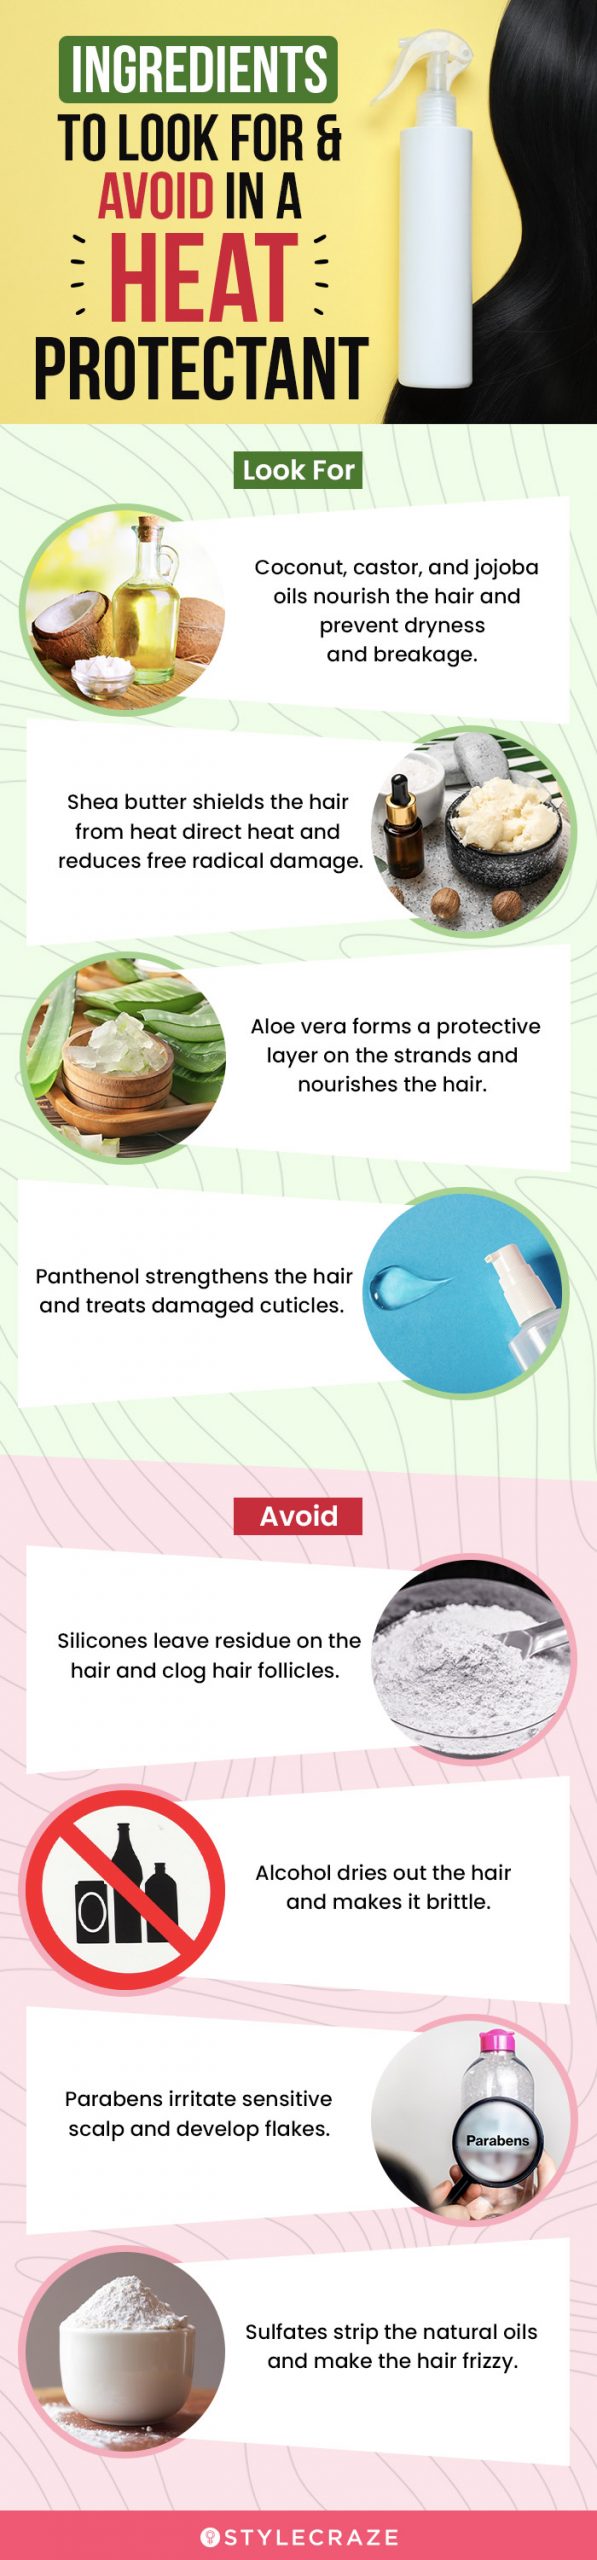 Ingredients To Look For & Avoid In A Heat Protectant (infographic)